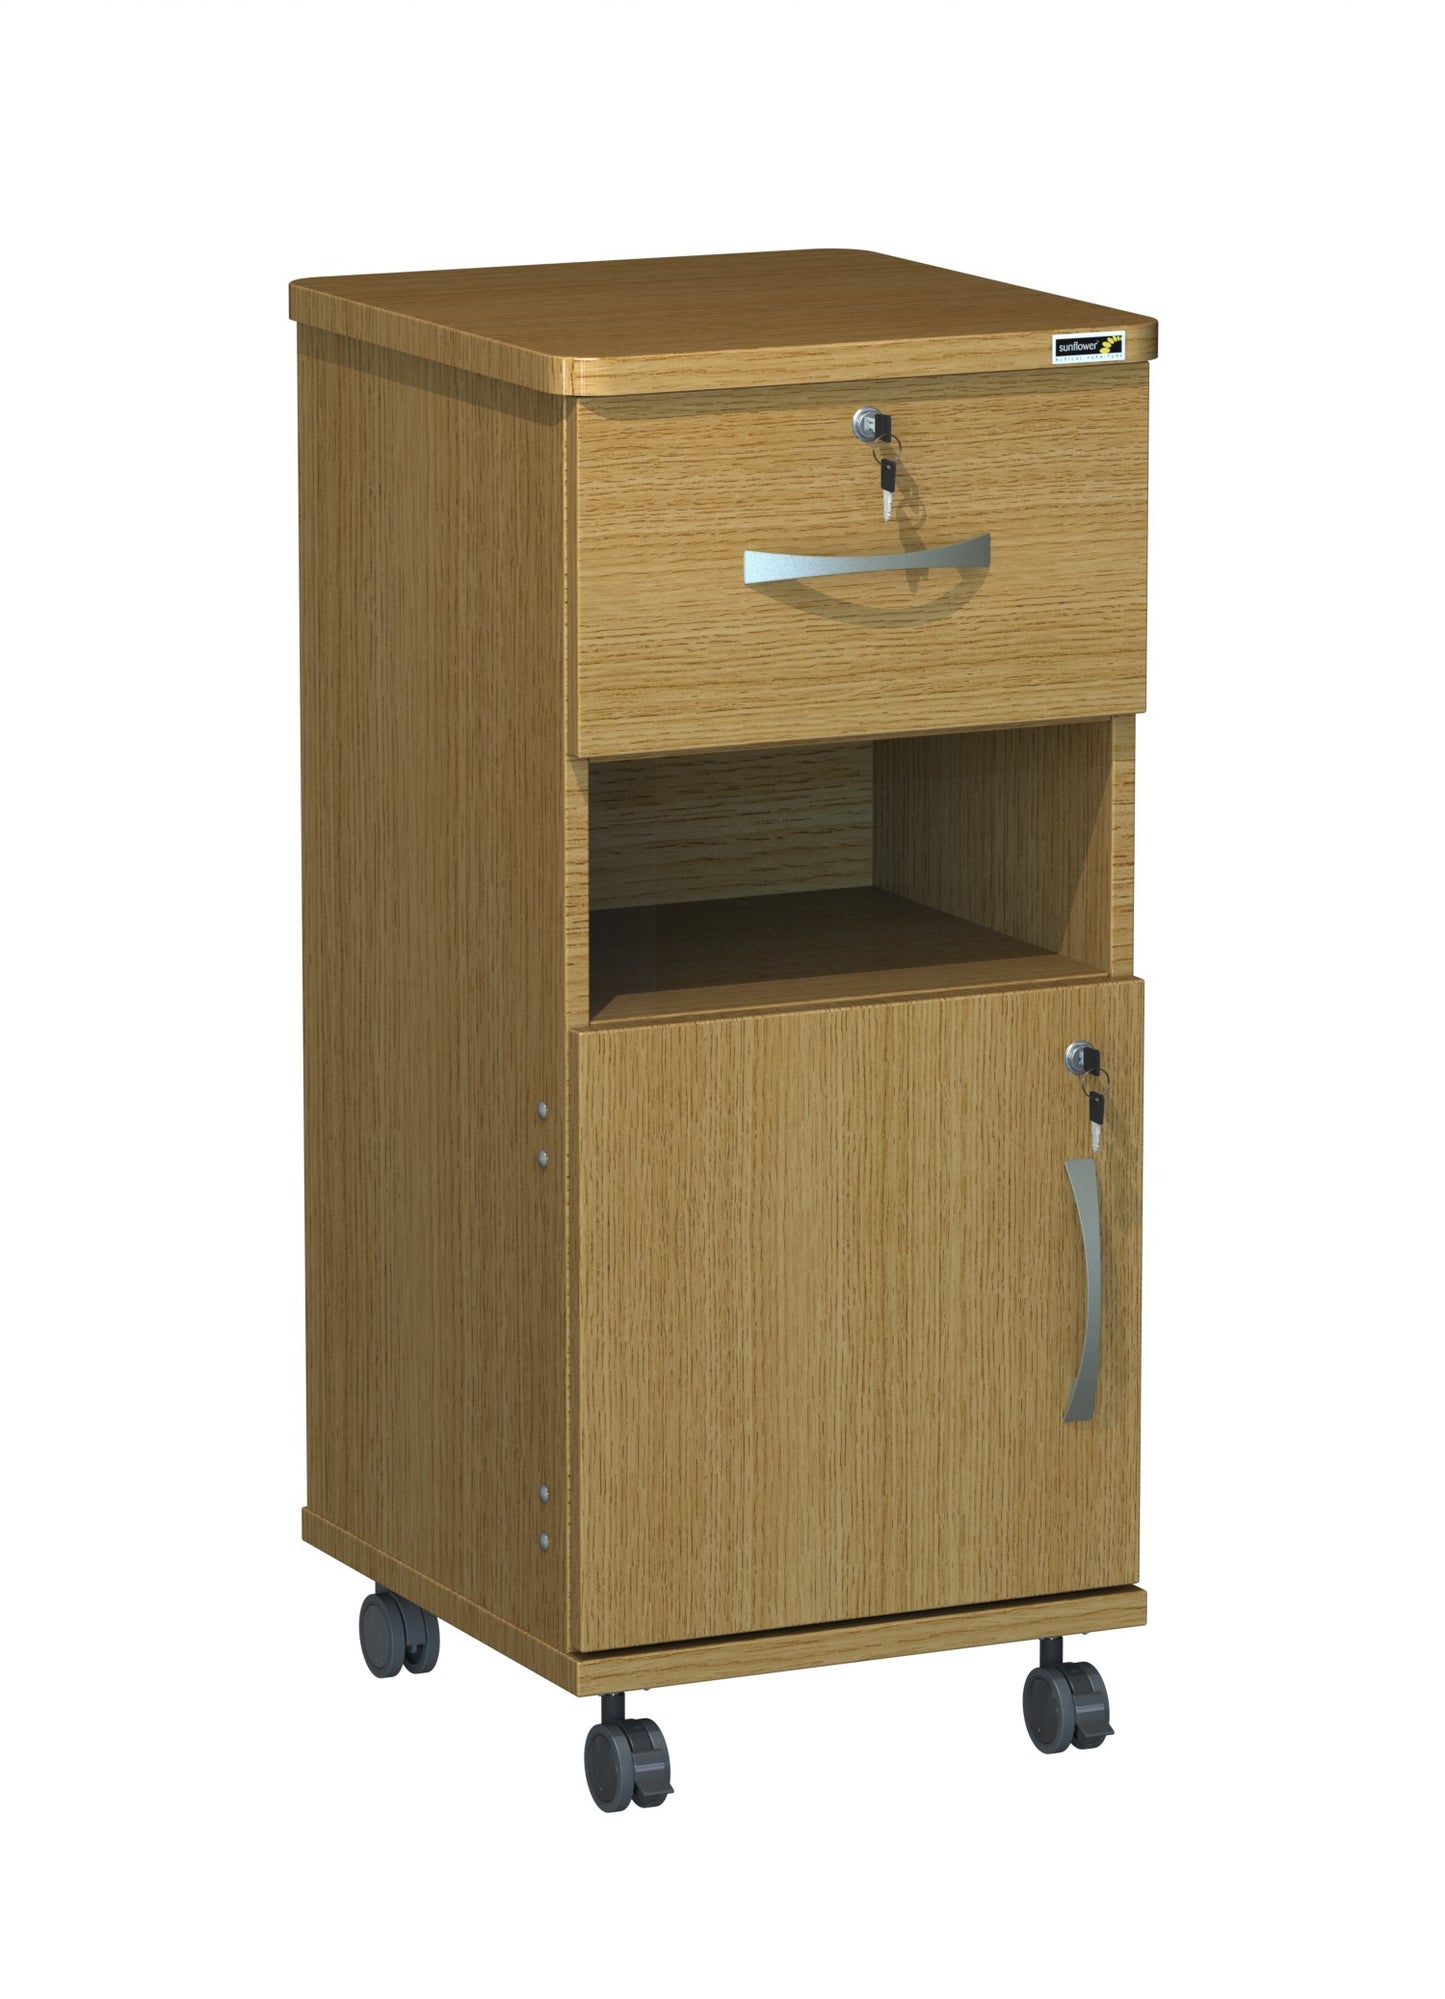 Axis Bedside Locker - Locking Large Top Drawer and Bottom Door - Open Middle